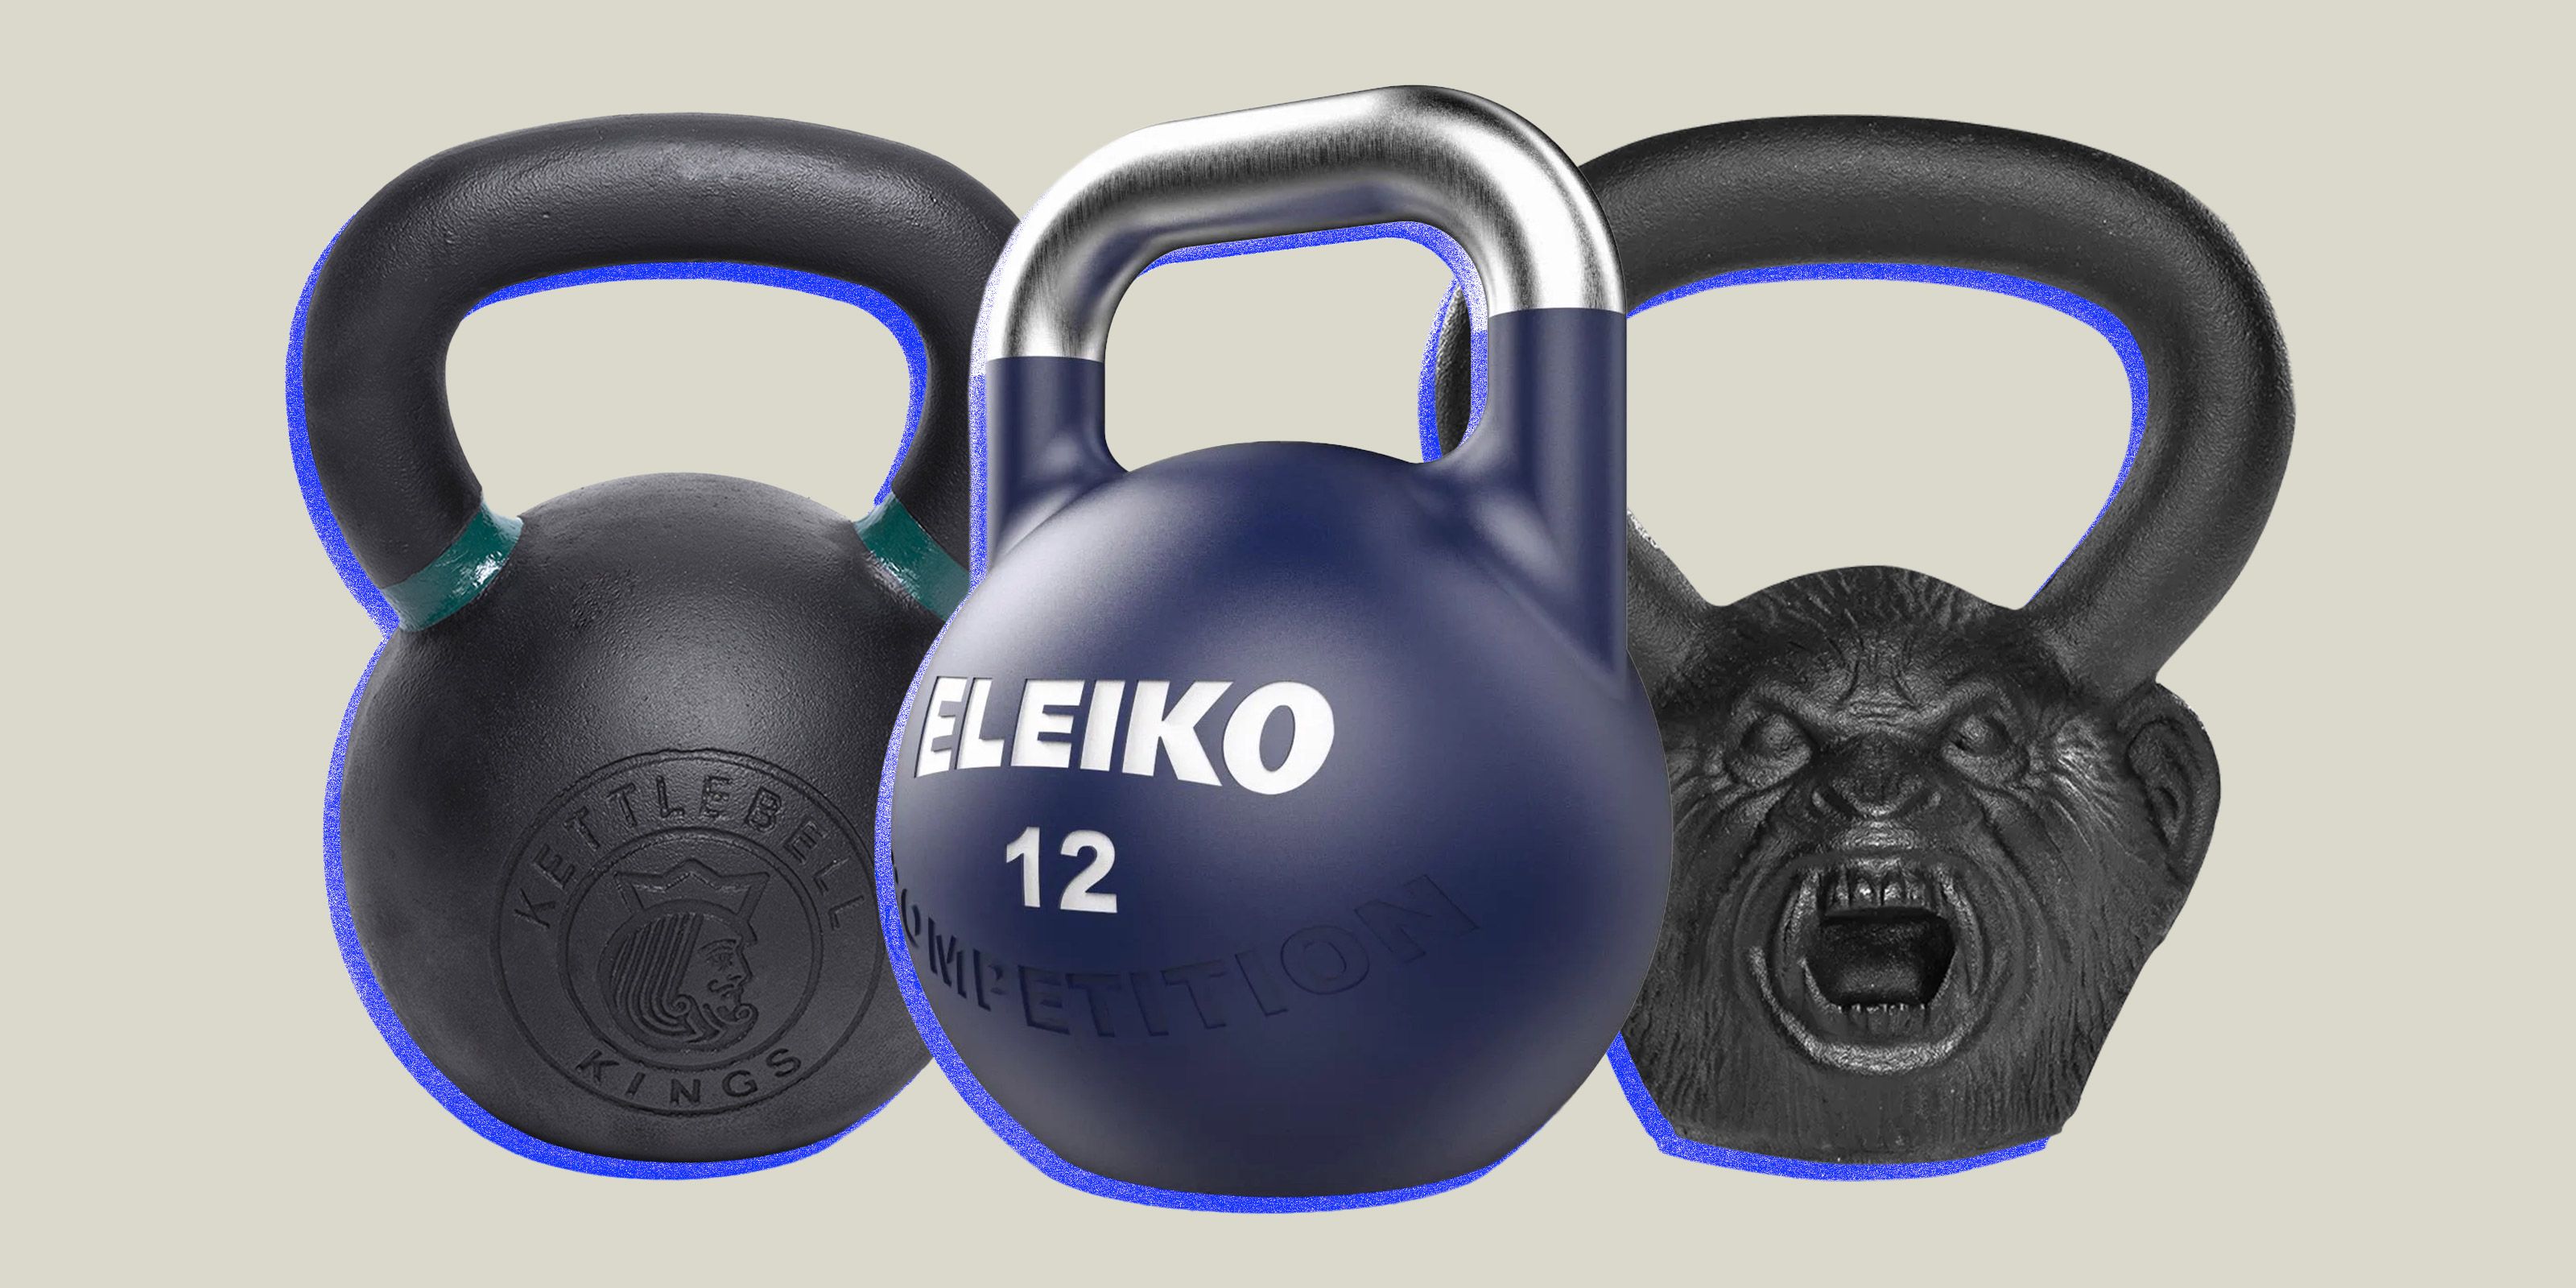 Knurre Lys Kedelig Start a New Workout Routine with the Best Kettlebells